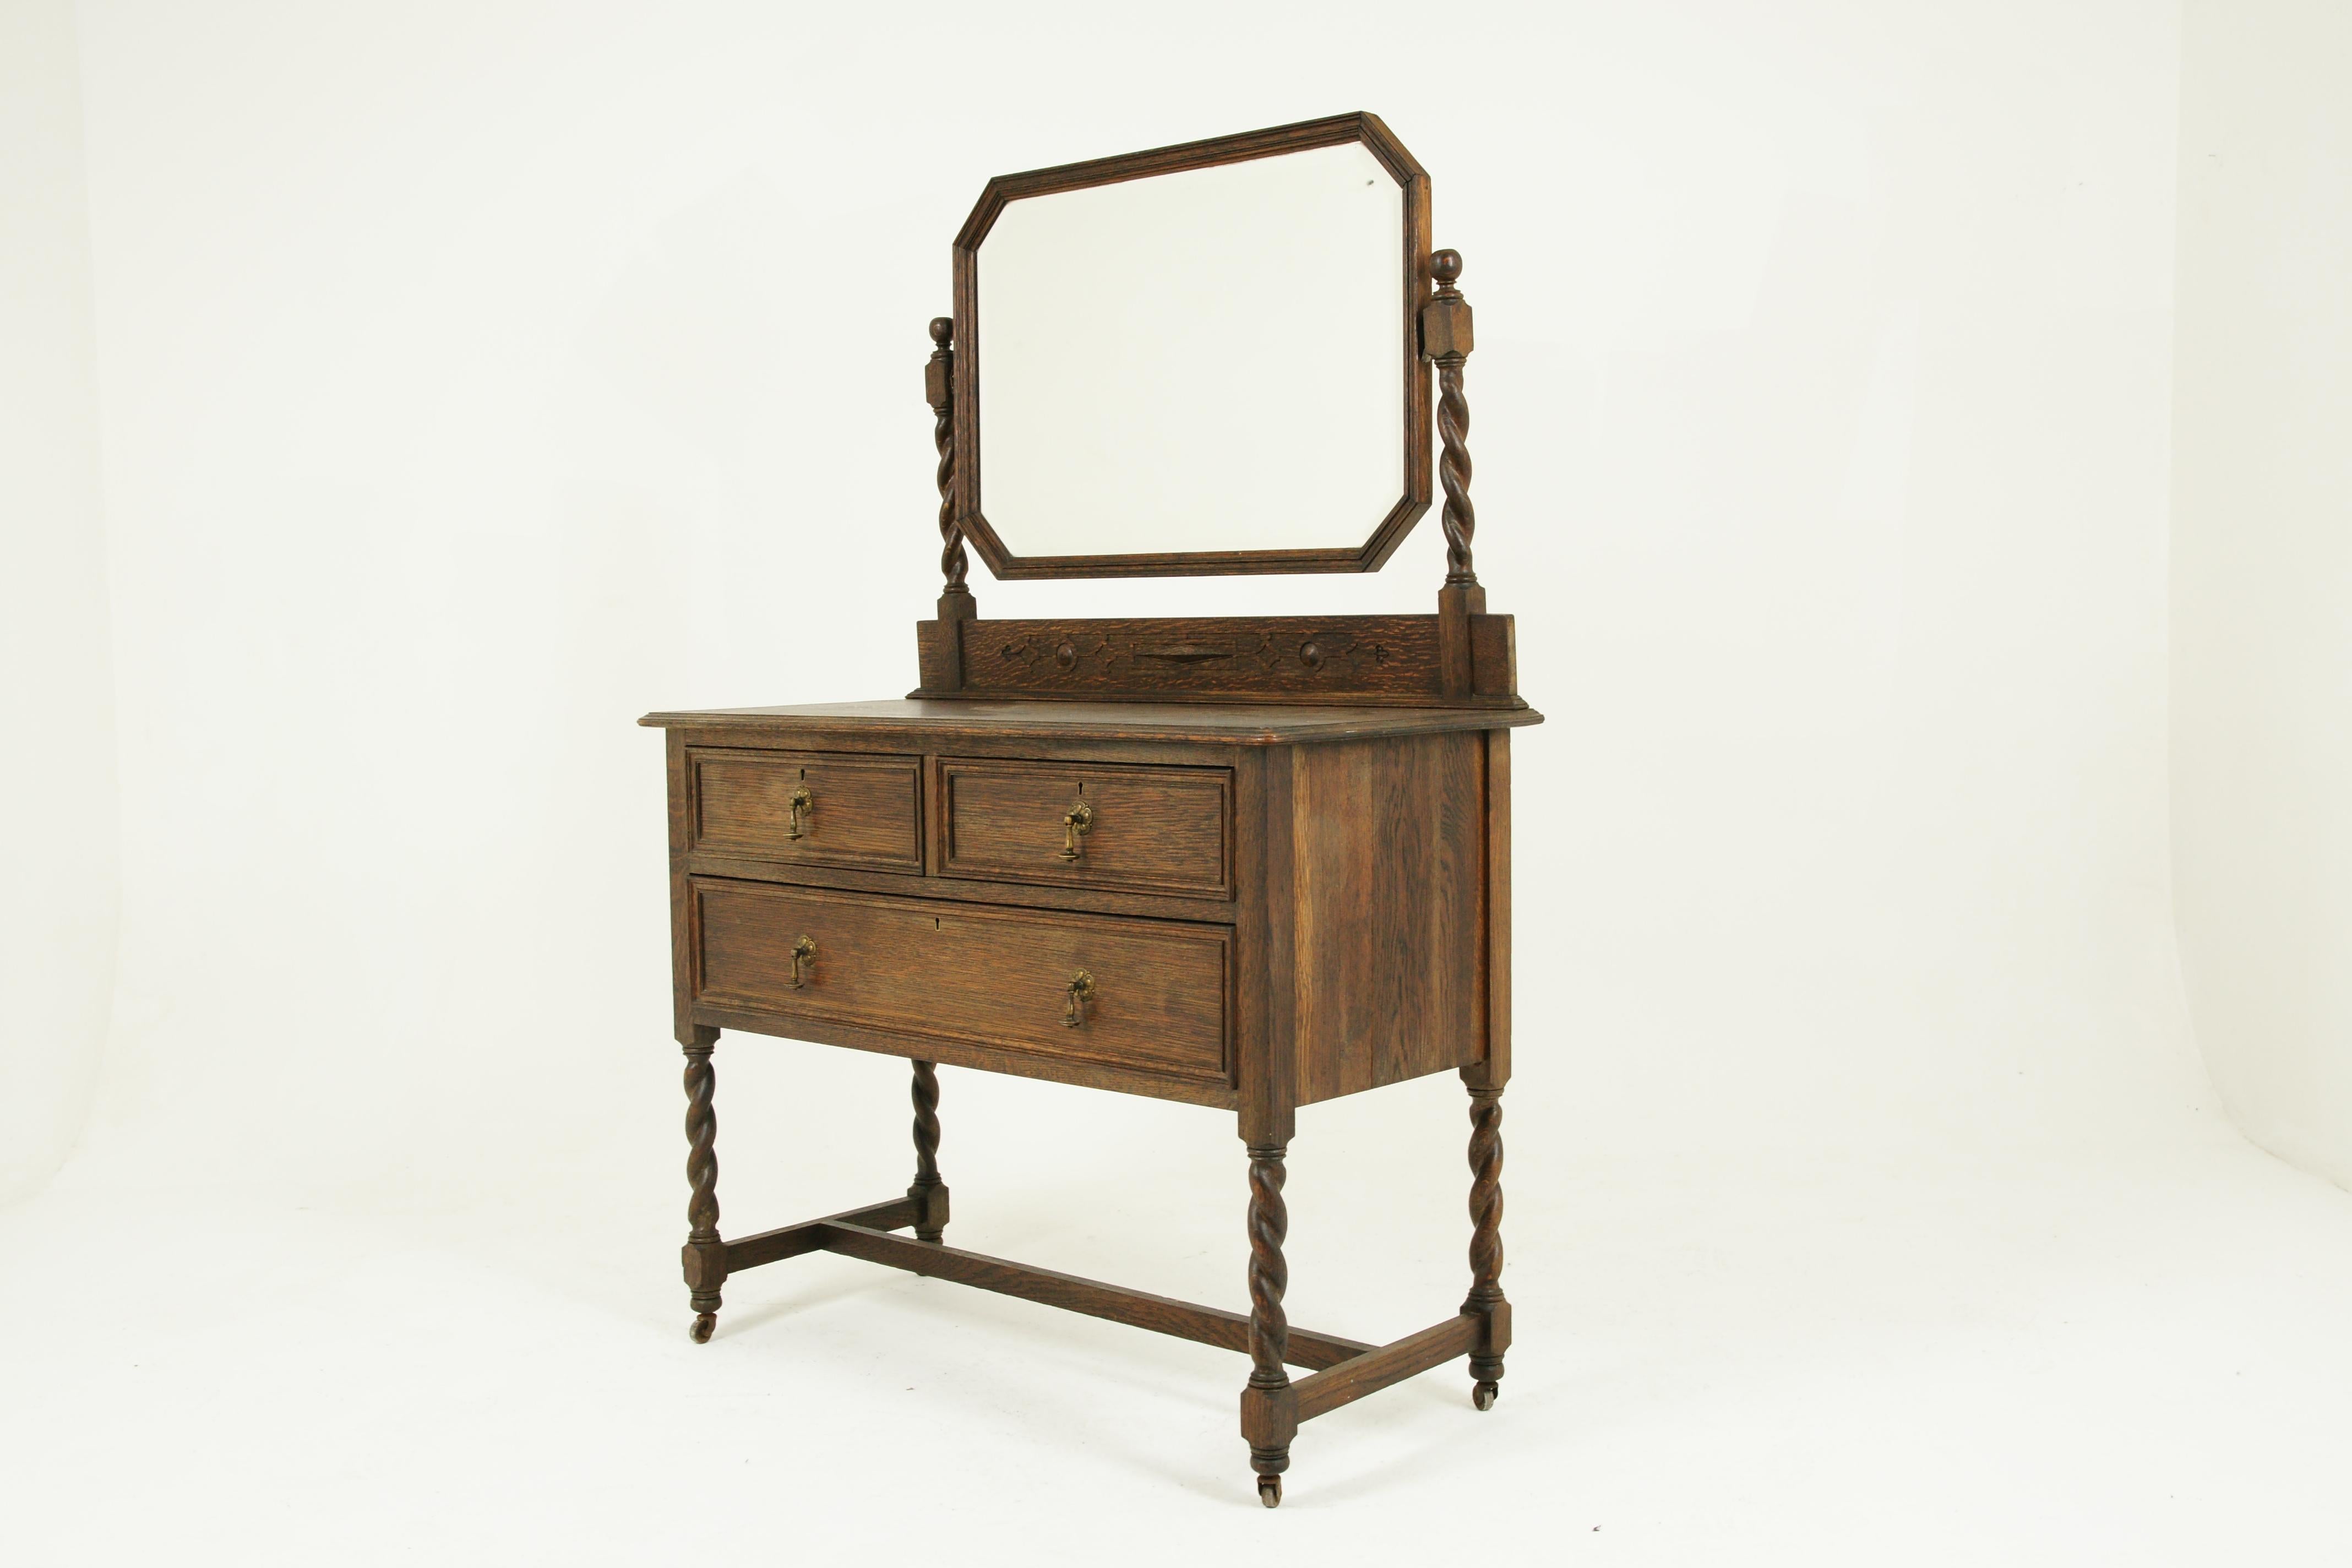 Antique vanity, antique oak dresser, Jacobean revival, tiger oak, Scotland 1910, antique furniture, B1335A

Scotland 1910
Solid oak
Original finish
Heavy beveled mirror
Supported by a pair of barley twist support posts
Carved gallery